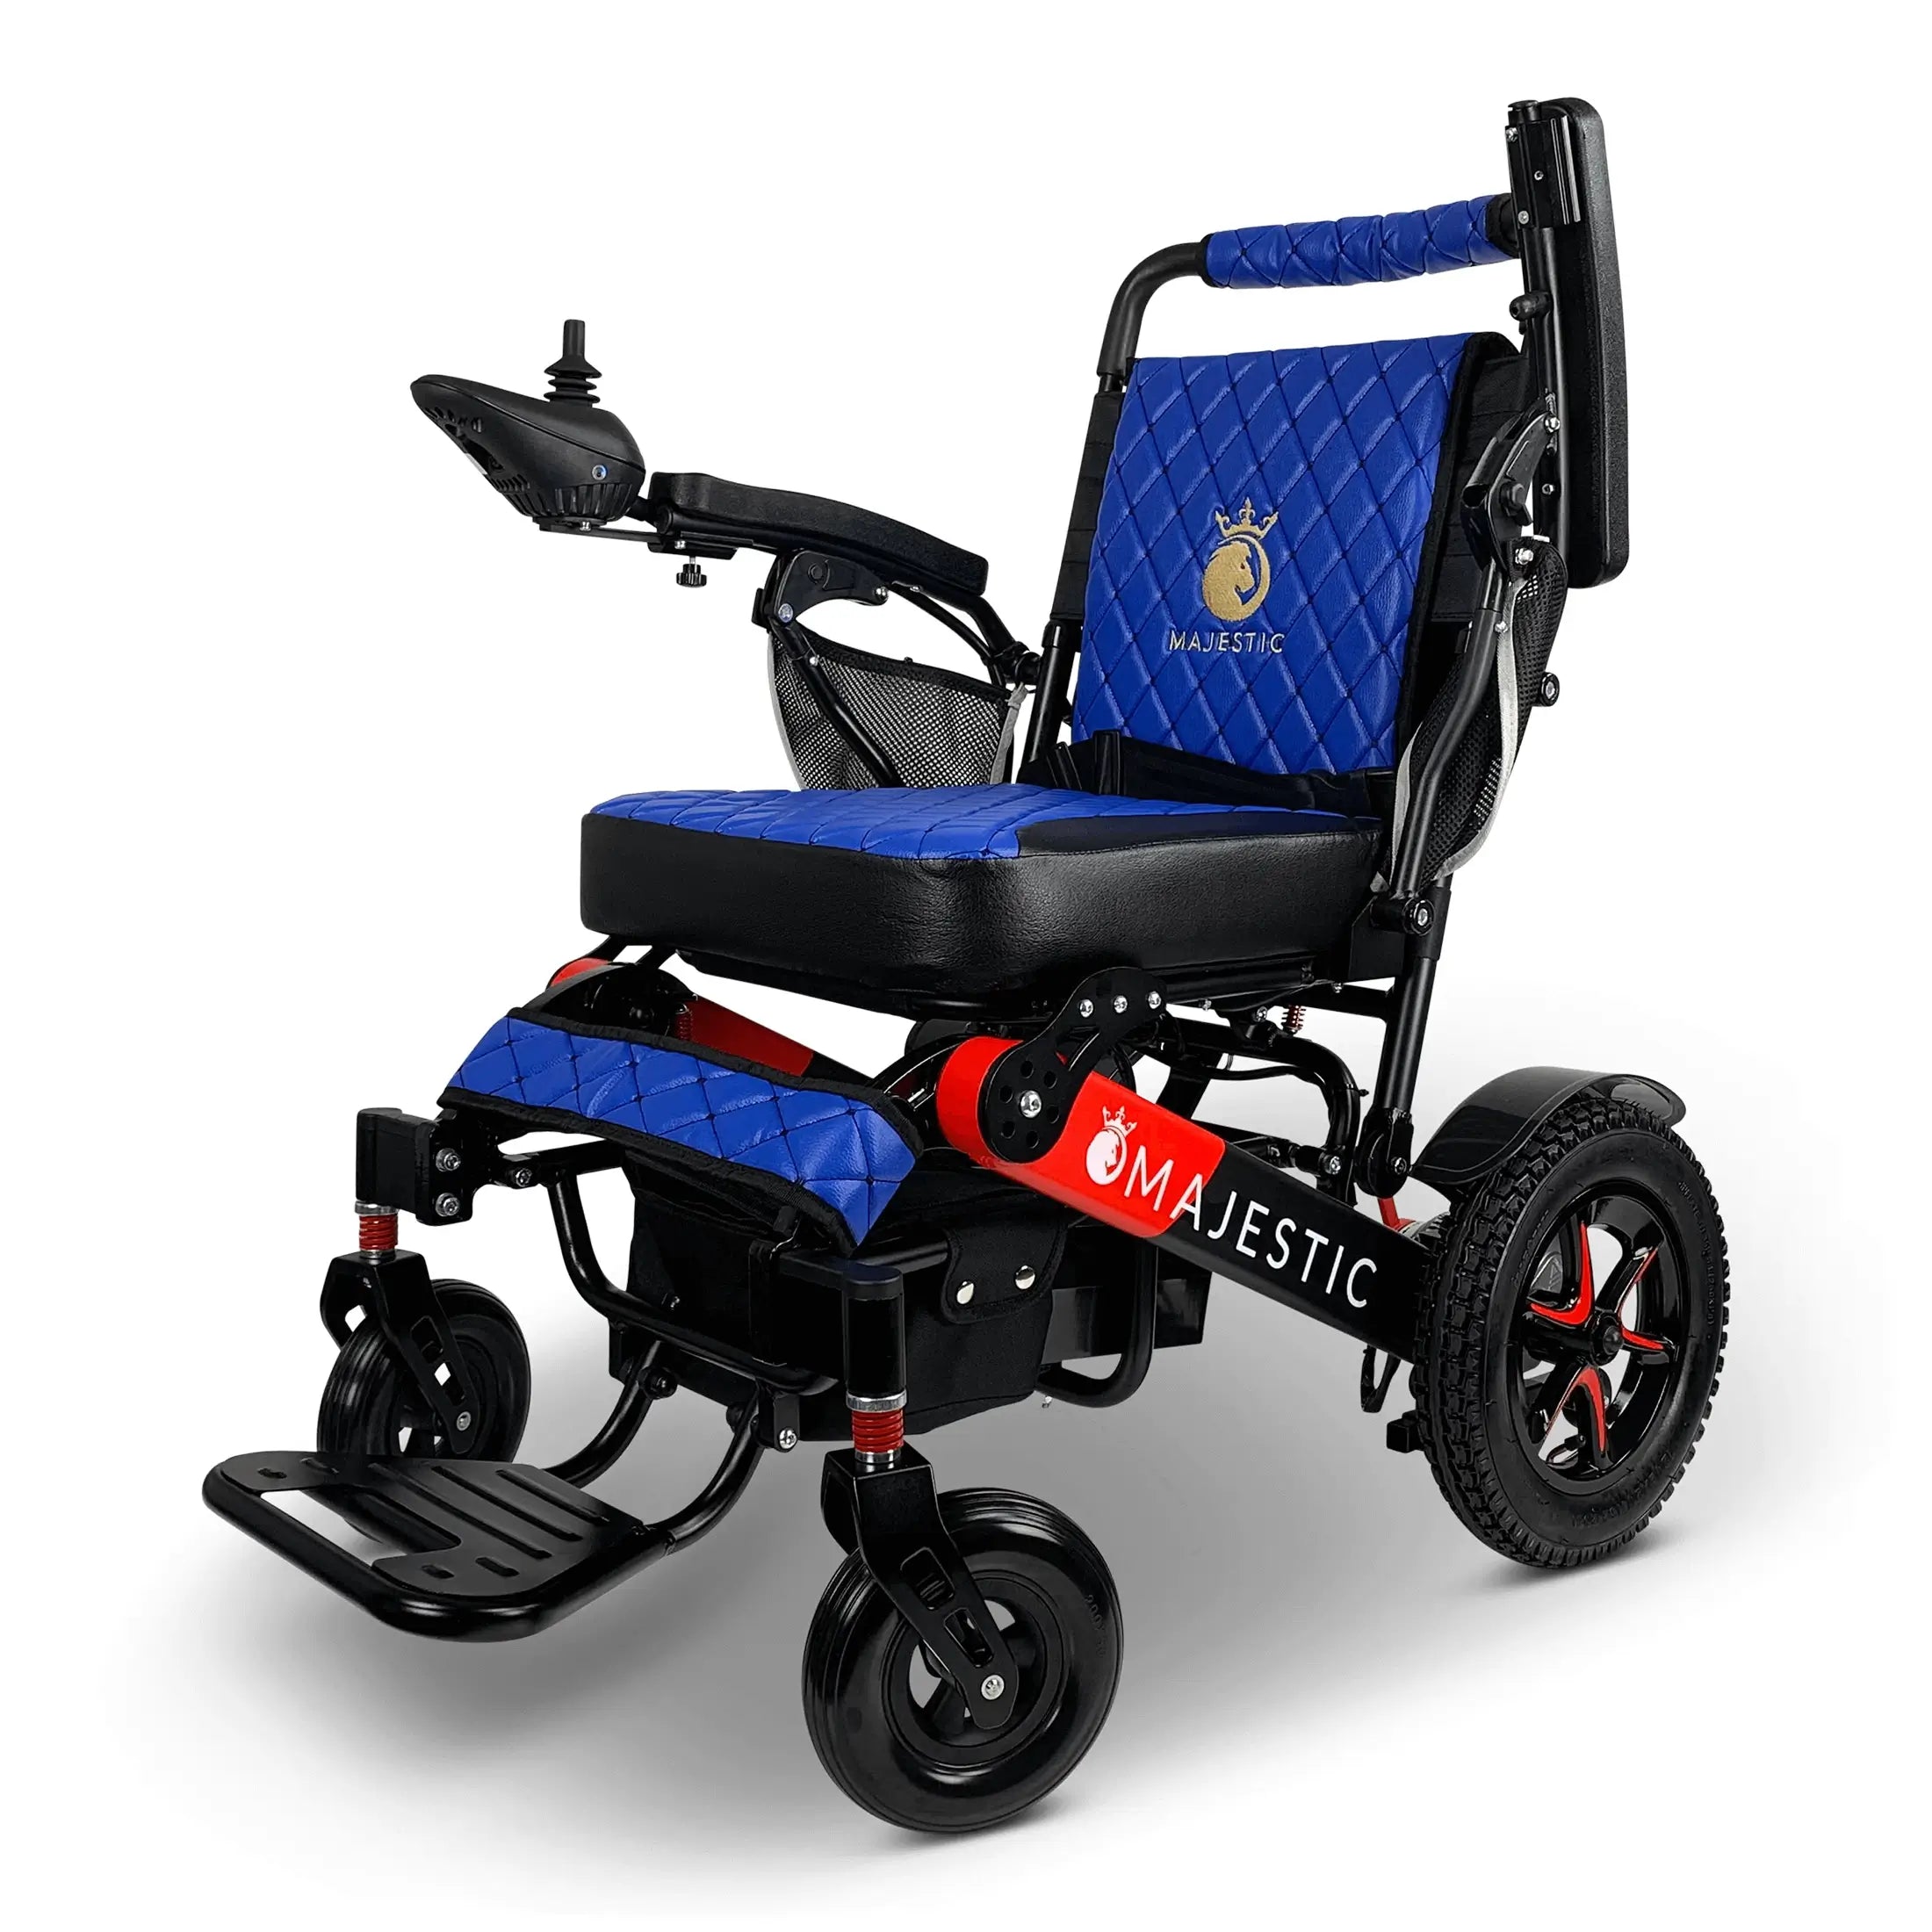 ComfyGo Majestic IQ-7000 Manual Folding Remote Controlled Electric Wheelchair Electric Wheelchair ComfyGo Black & Red Blue Up To 13 Miles - 12AH Battery